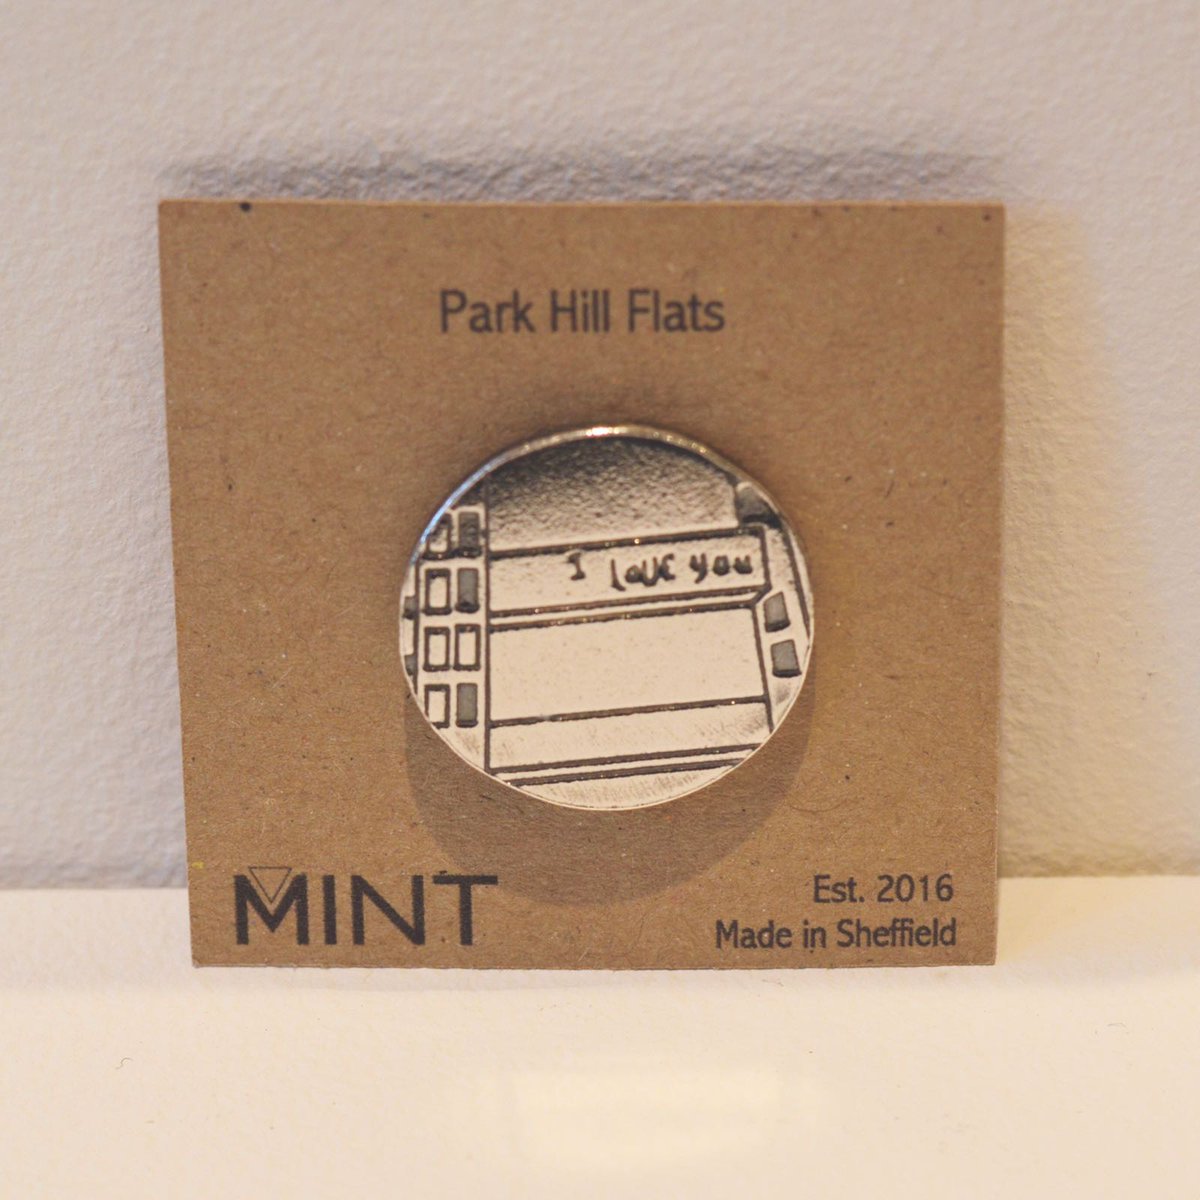 Get that special loved one a #mintgift for #ValentinesDay #parkhillflats #iloveyou #sheffield #sheffieldissuper  #myfavouriteplaces